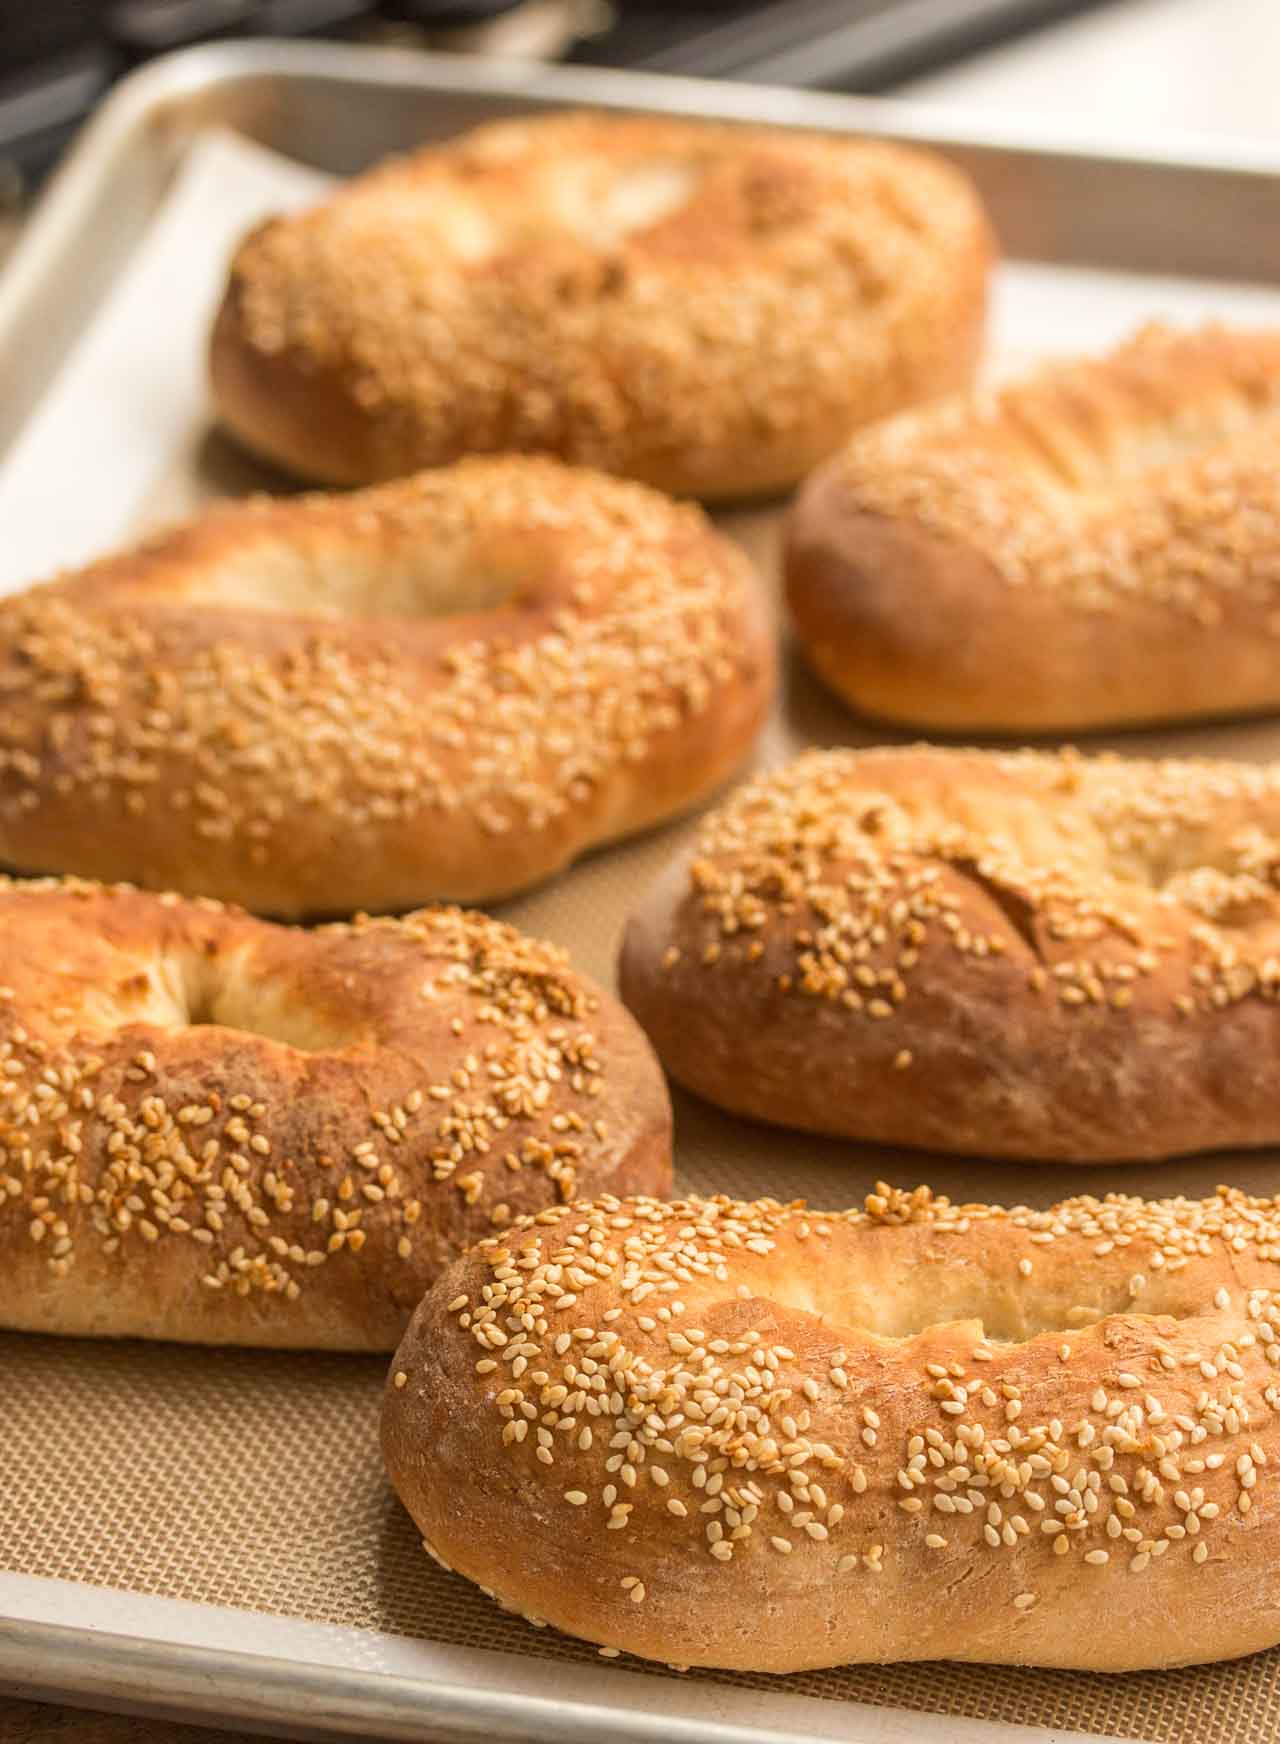 A delicious bread recipe, perfect for dipping in hummus or your favorite Middle Eastern spread!